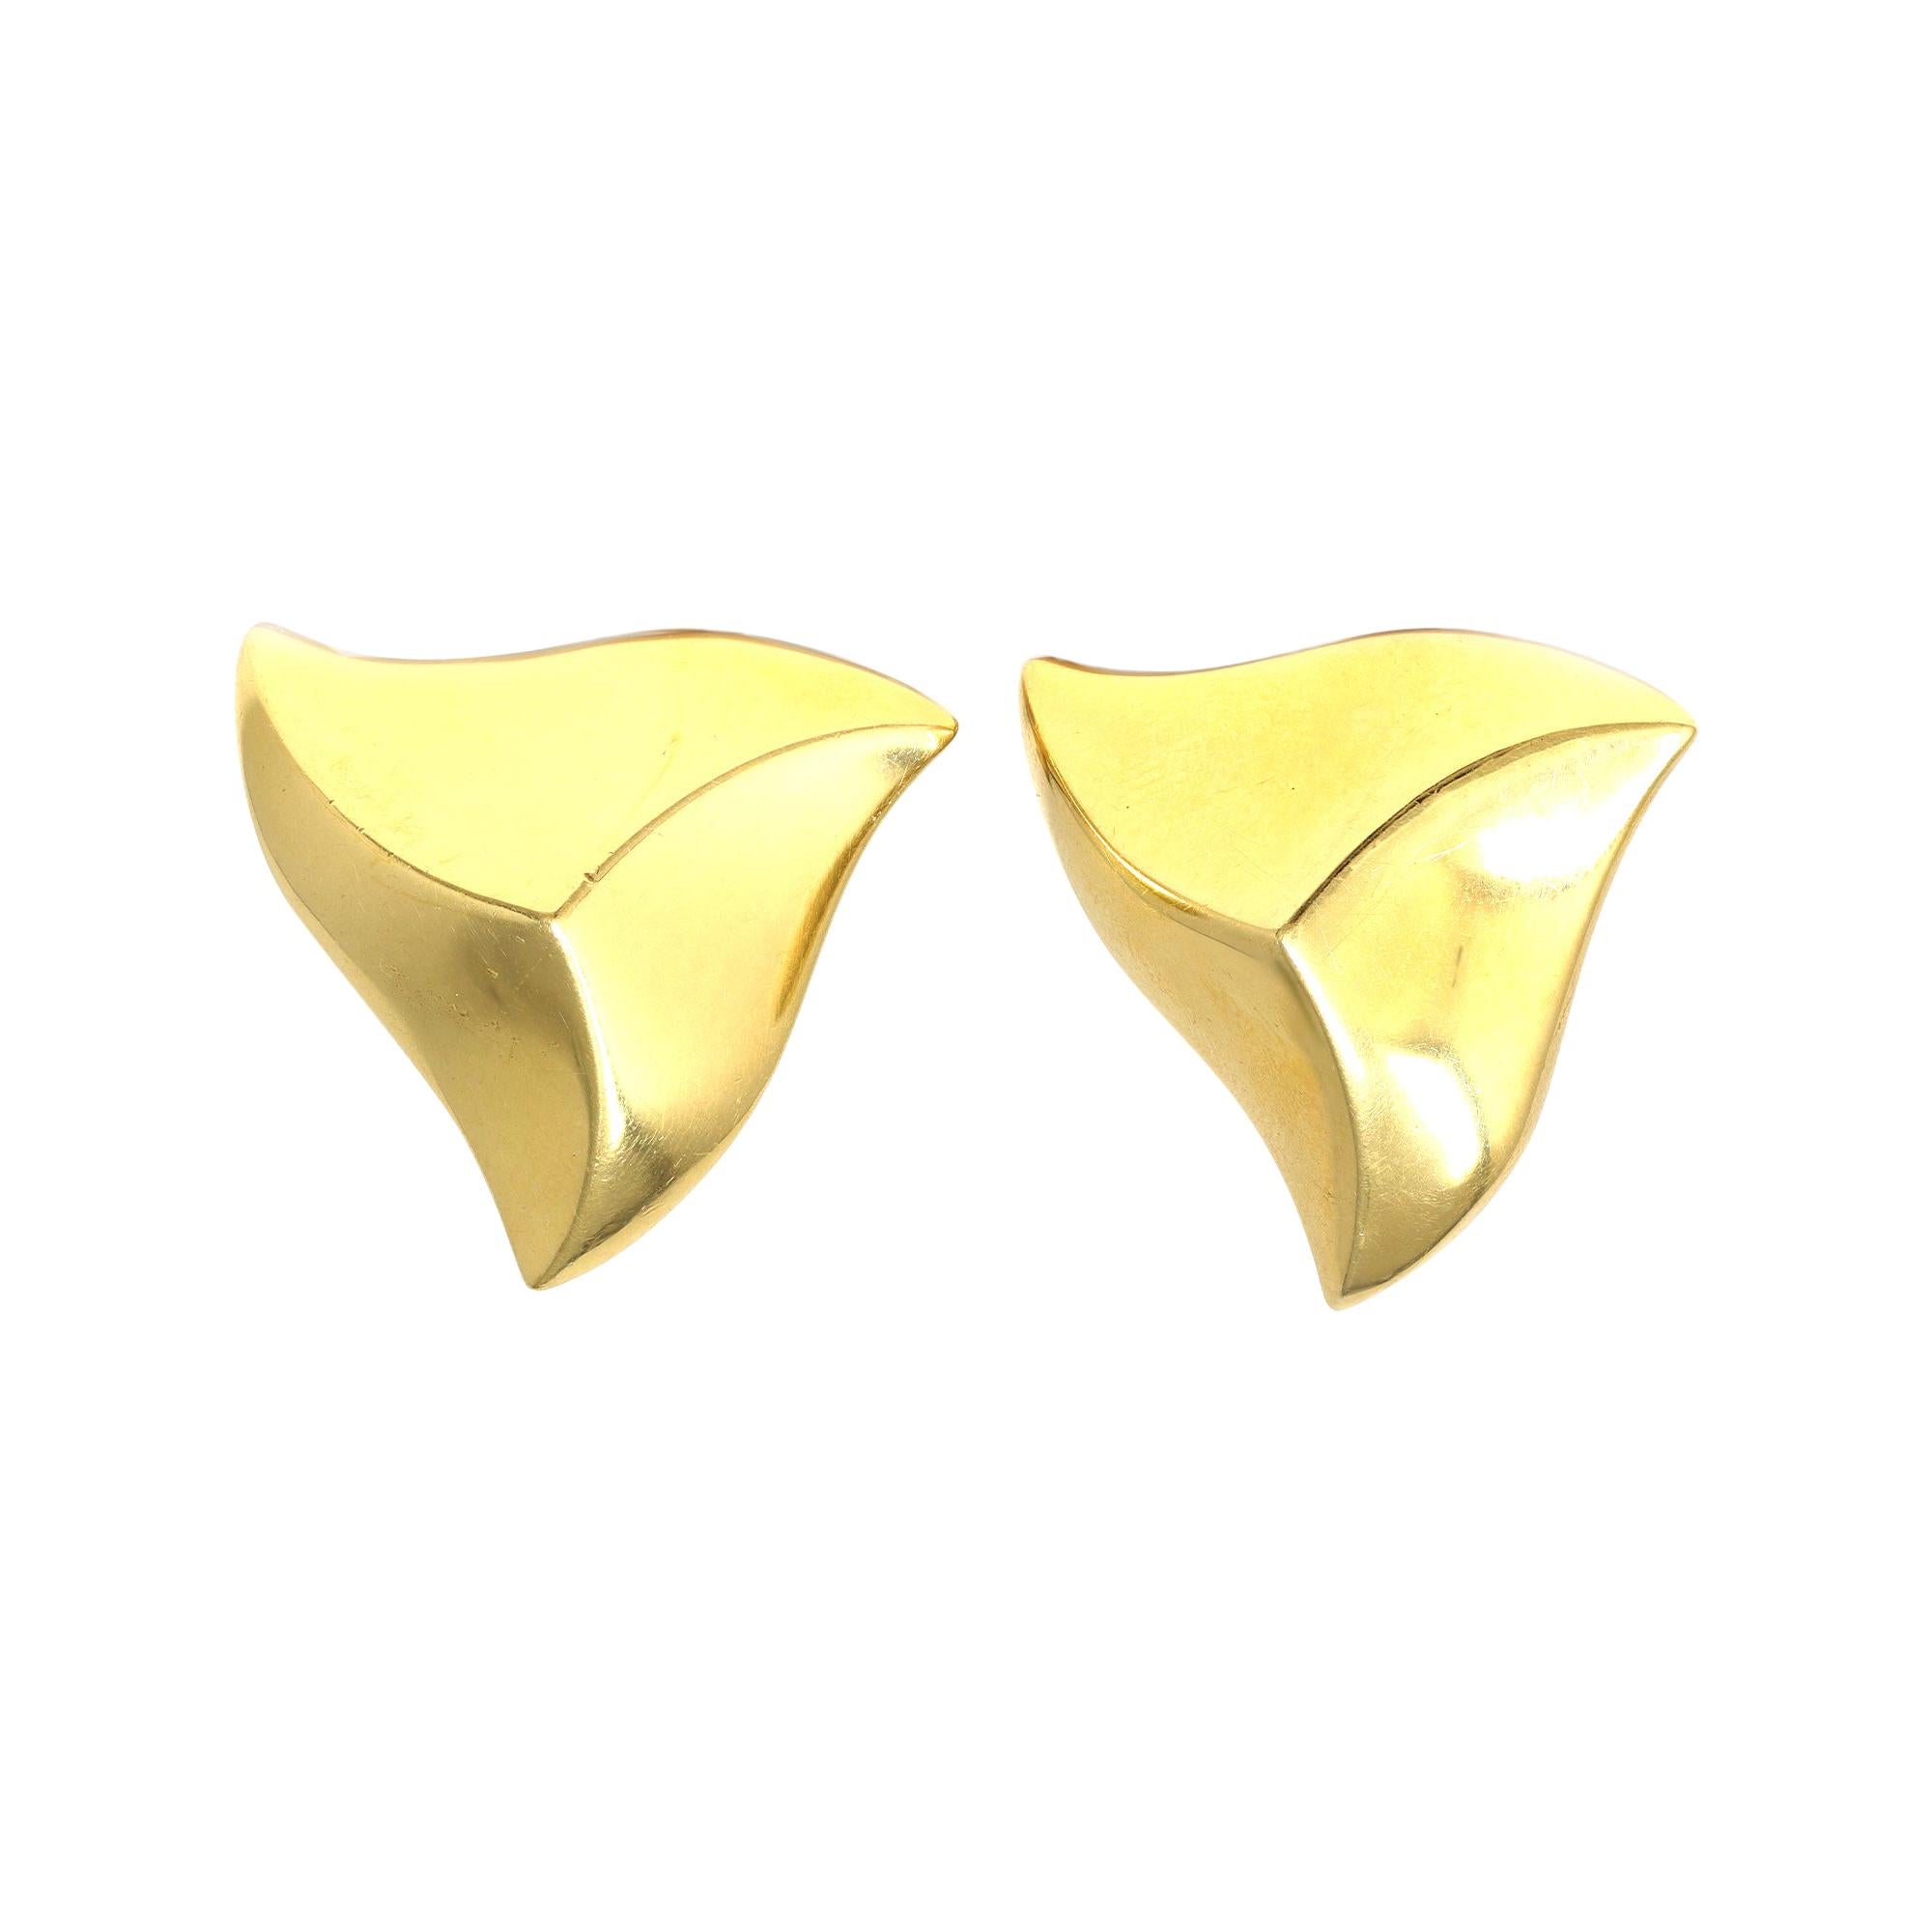 A unique pyramidal shape clip-on earrings by the iconic designer Angela Cummings, circa 1990. The earrings have posts and omega backs. They are set in 18-karat polished yellow gold and have a gross weight of  33.4 grams. They measure 1.21 inches